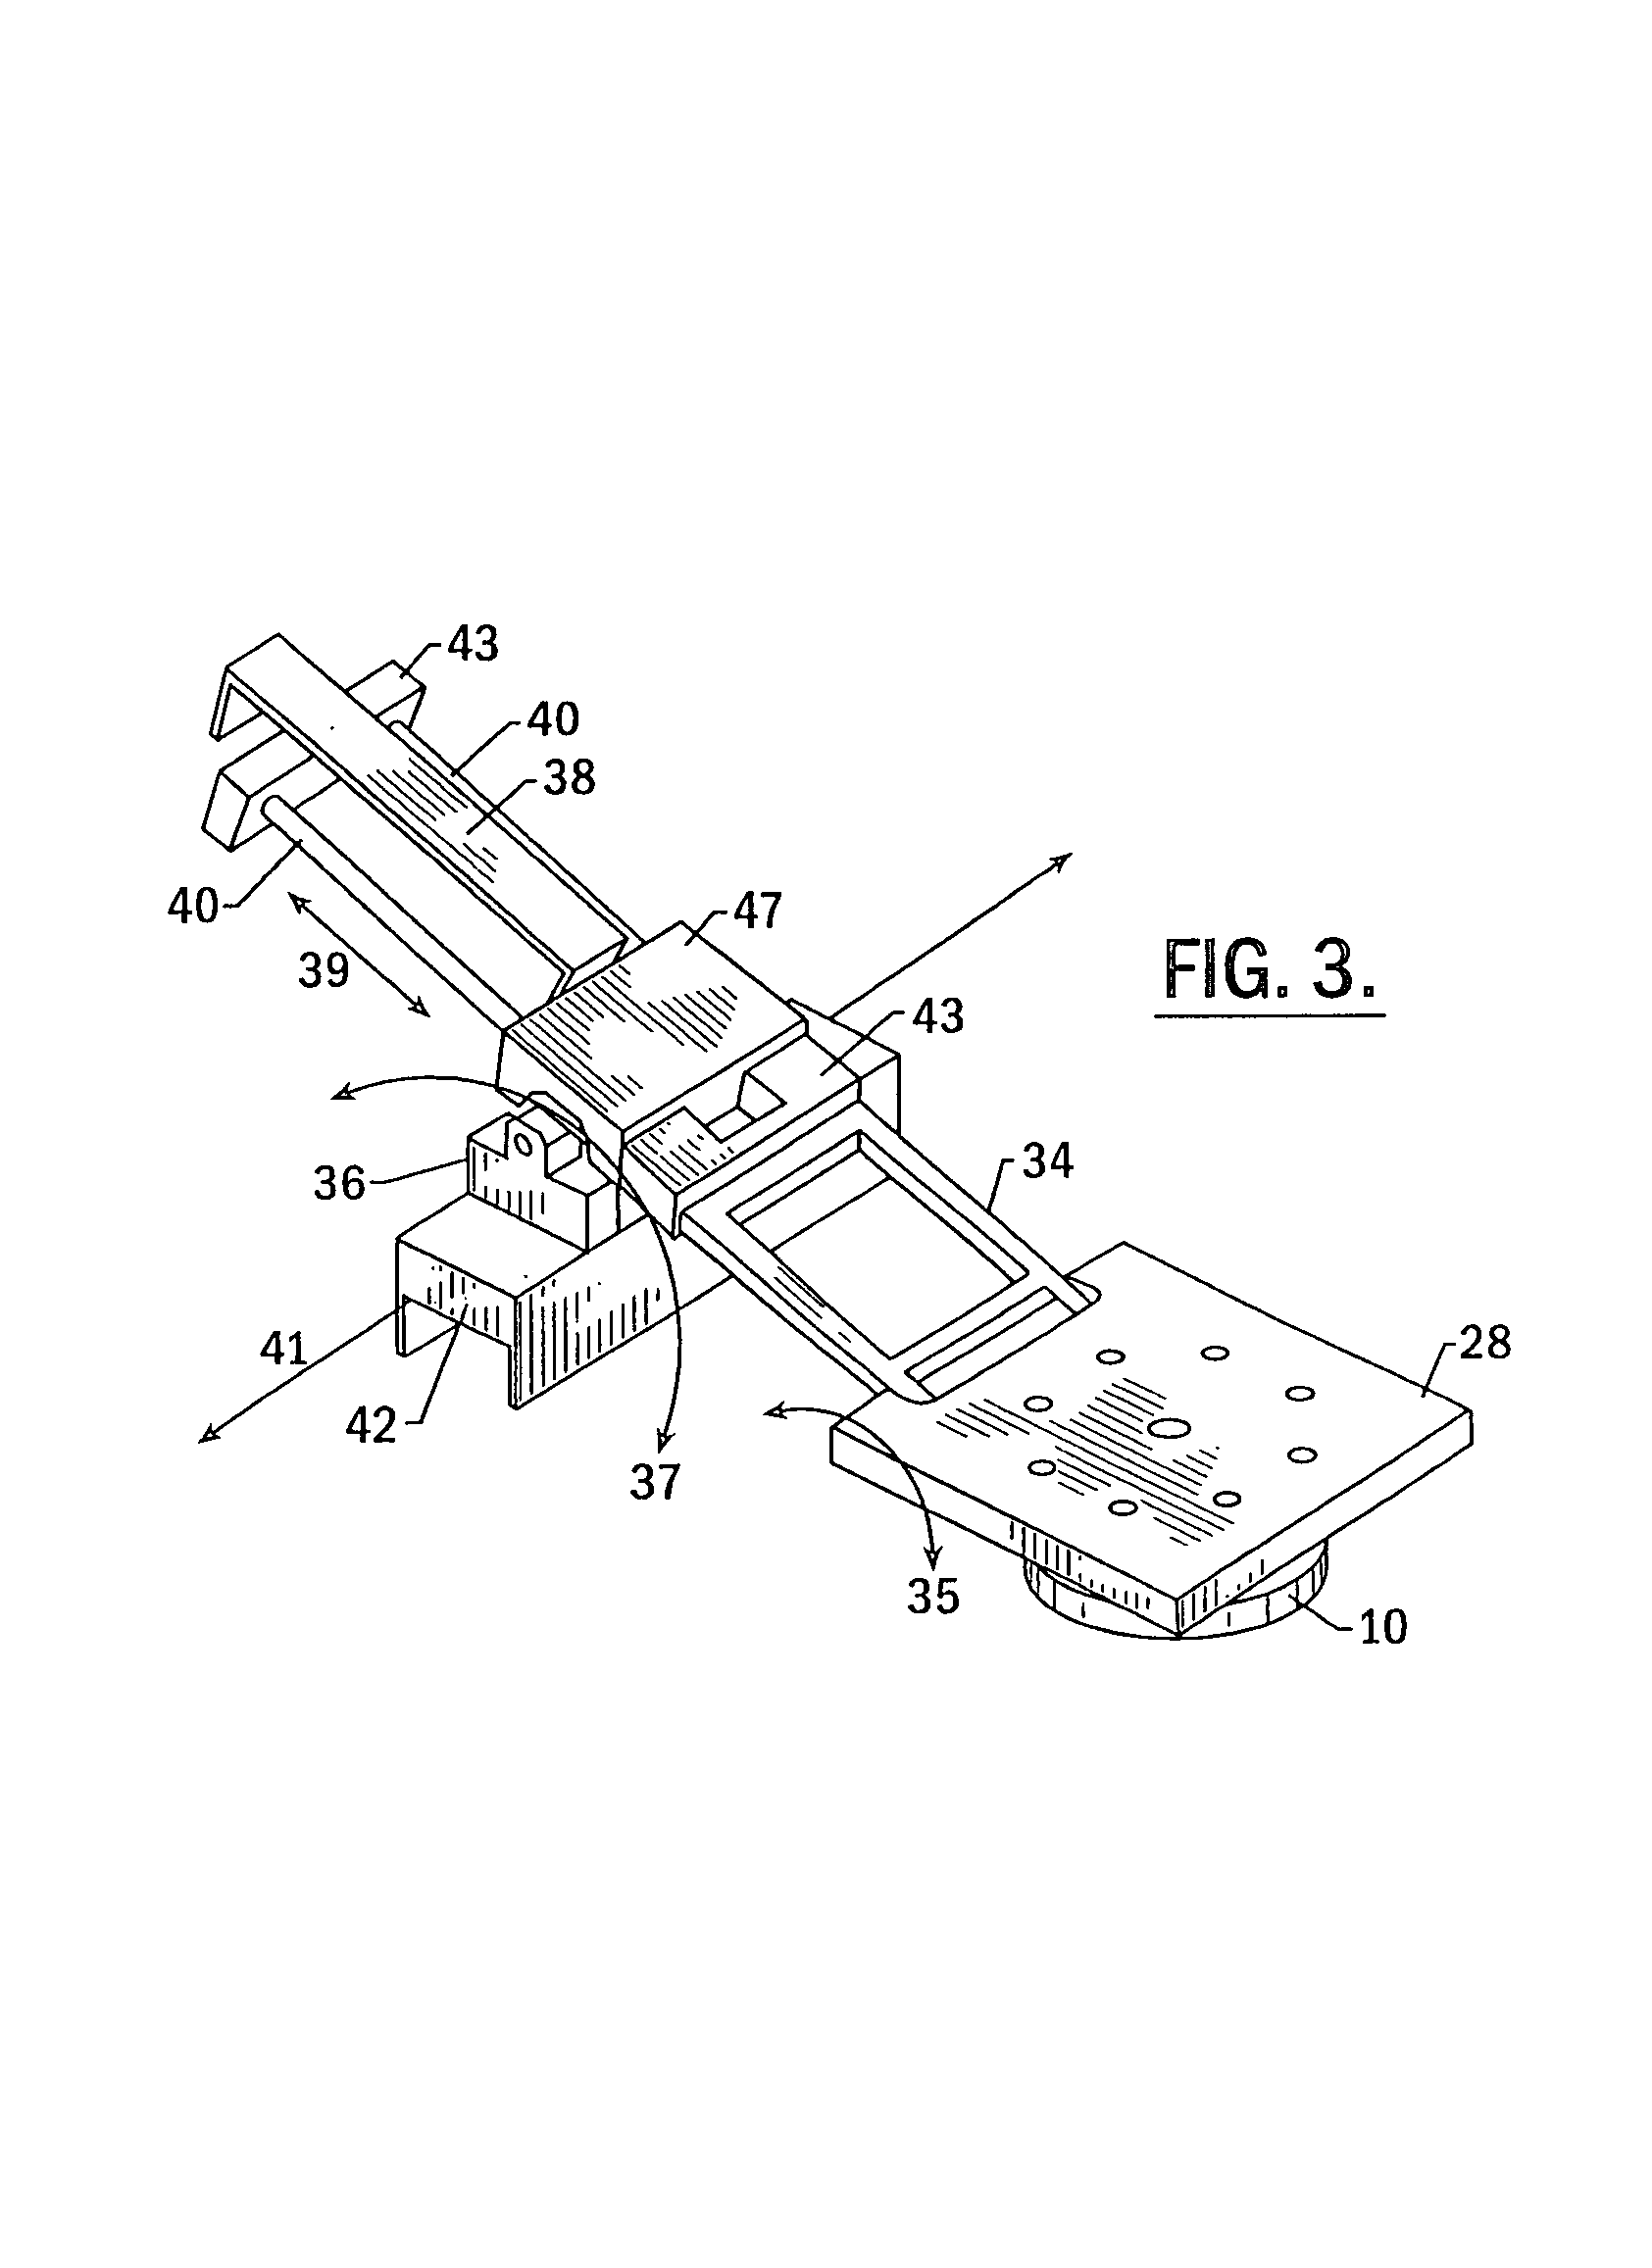 Method for drilling holes and optionally inserting fasteners